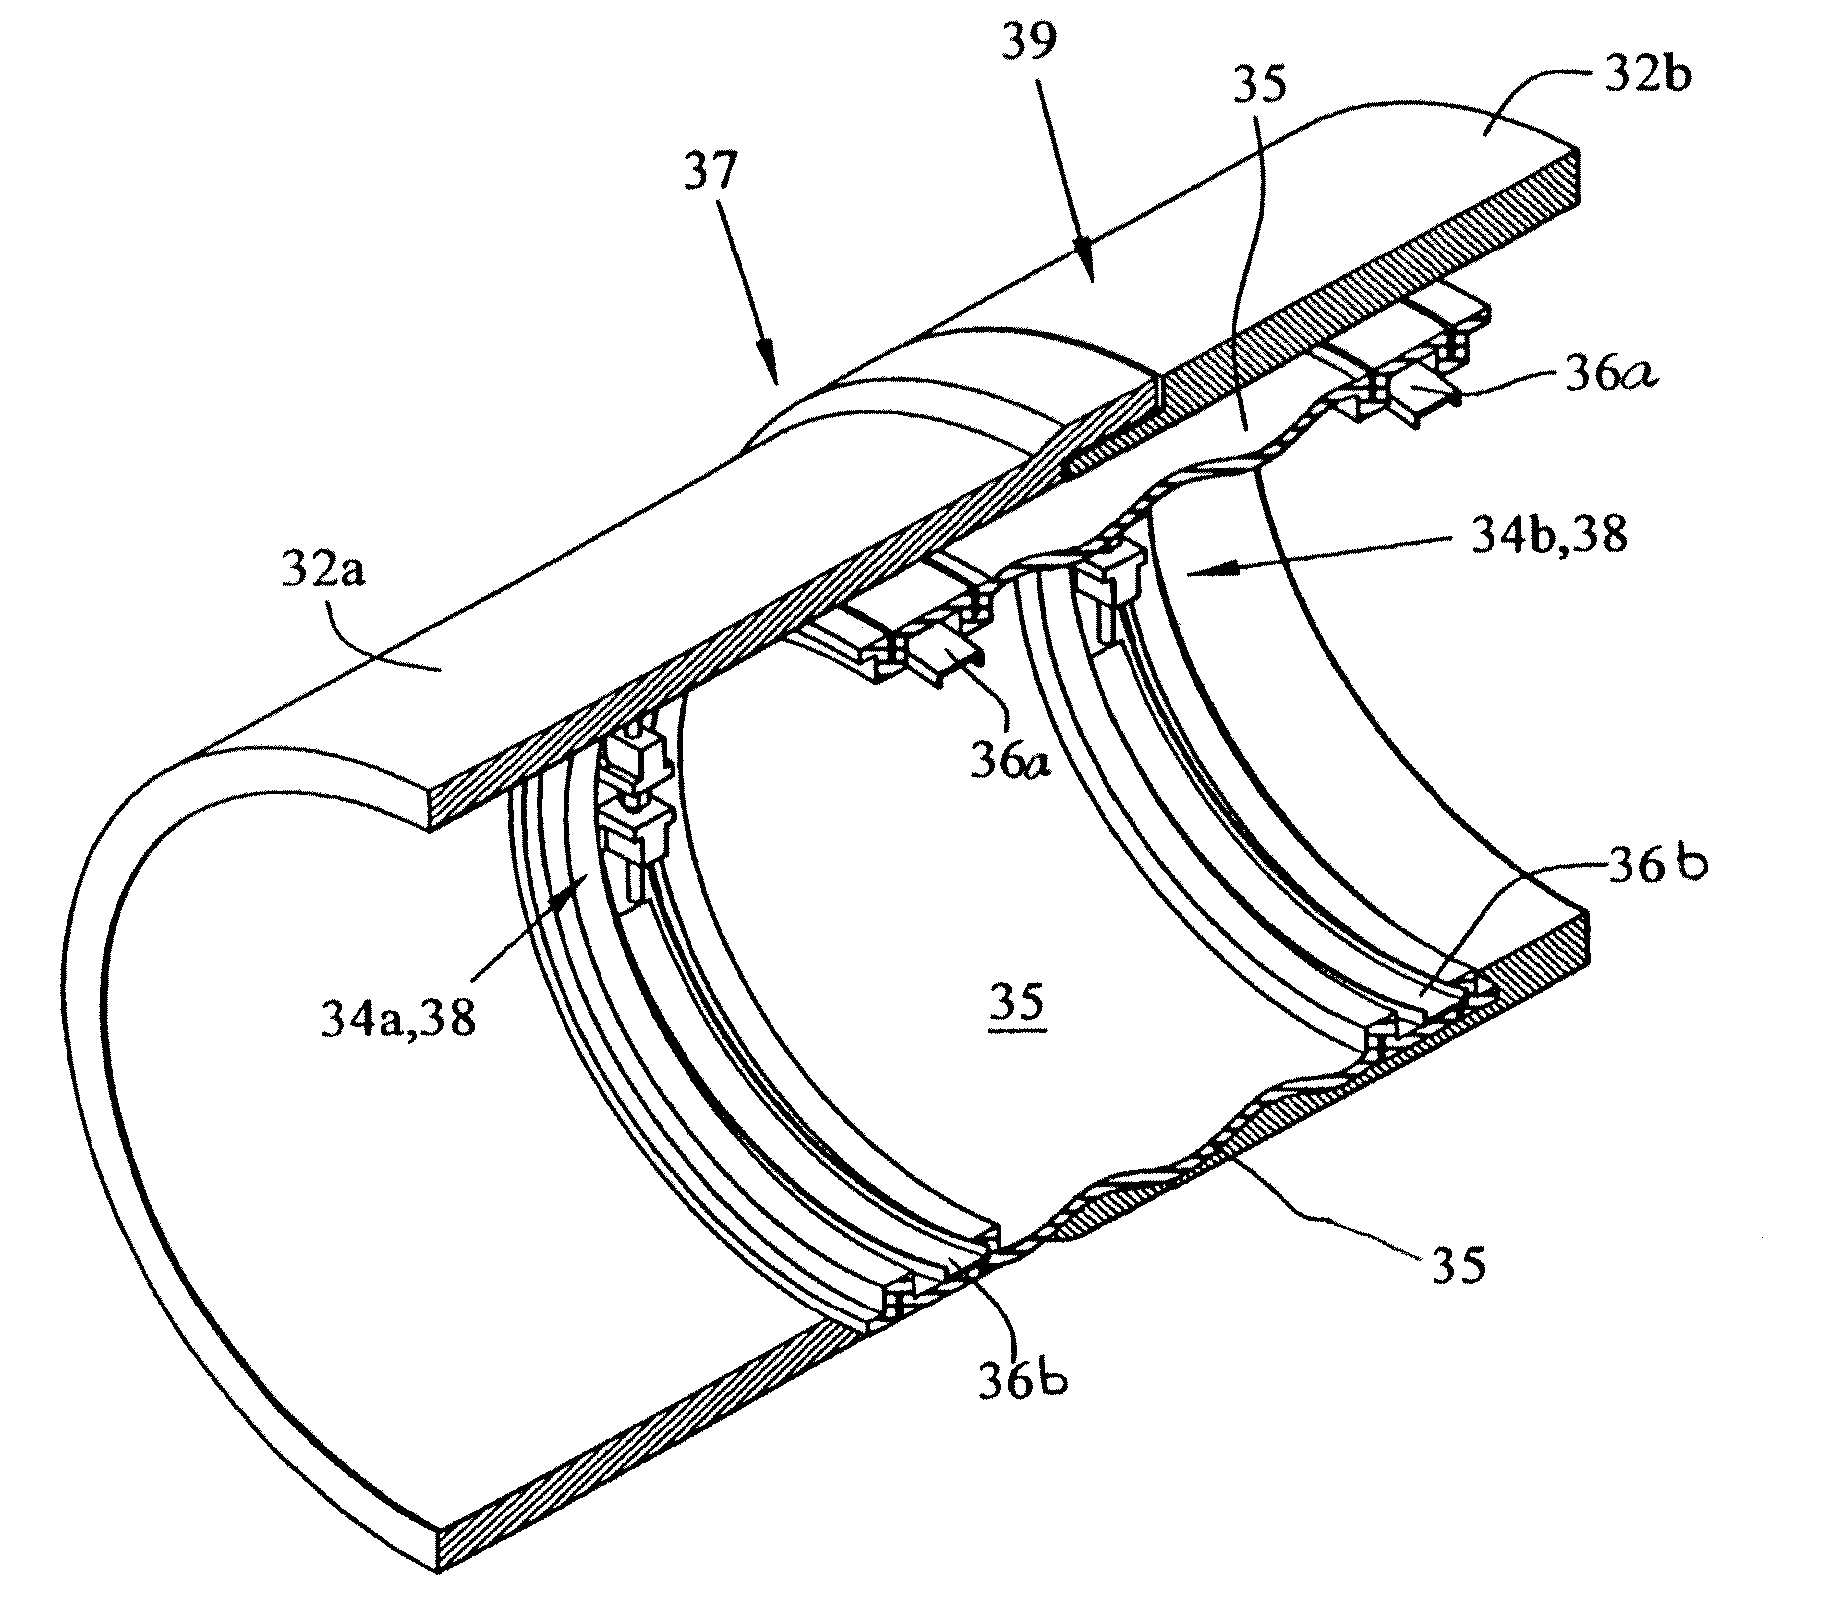 Expansion ring assembly